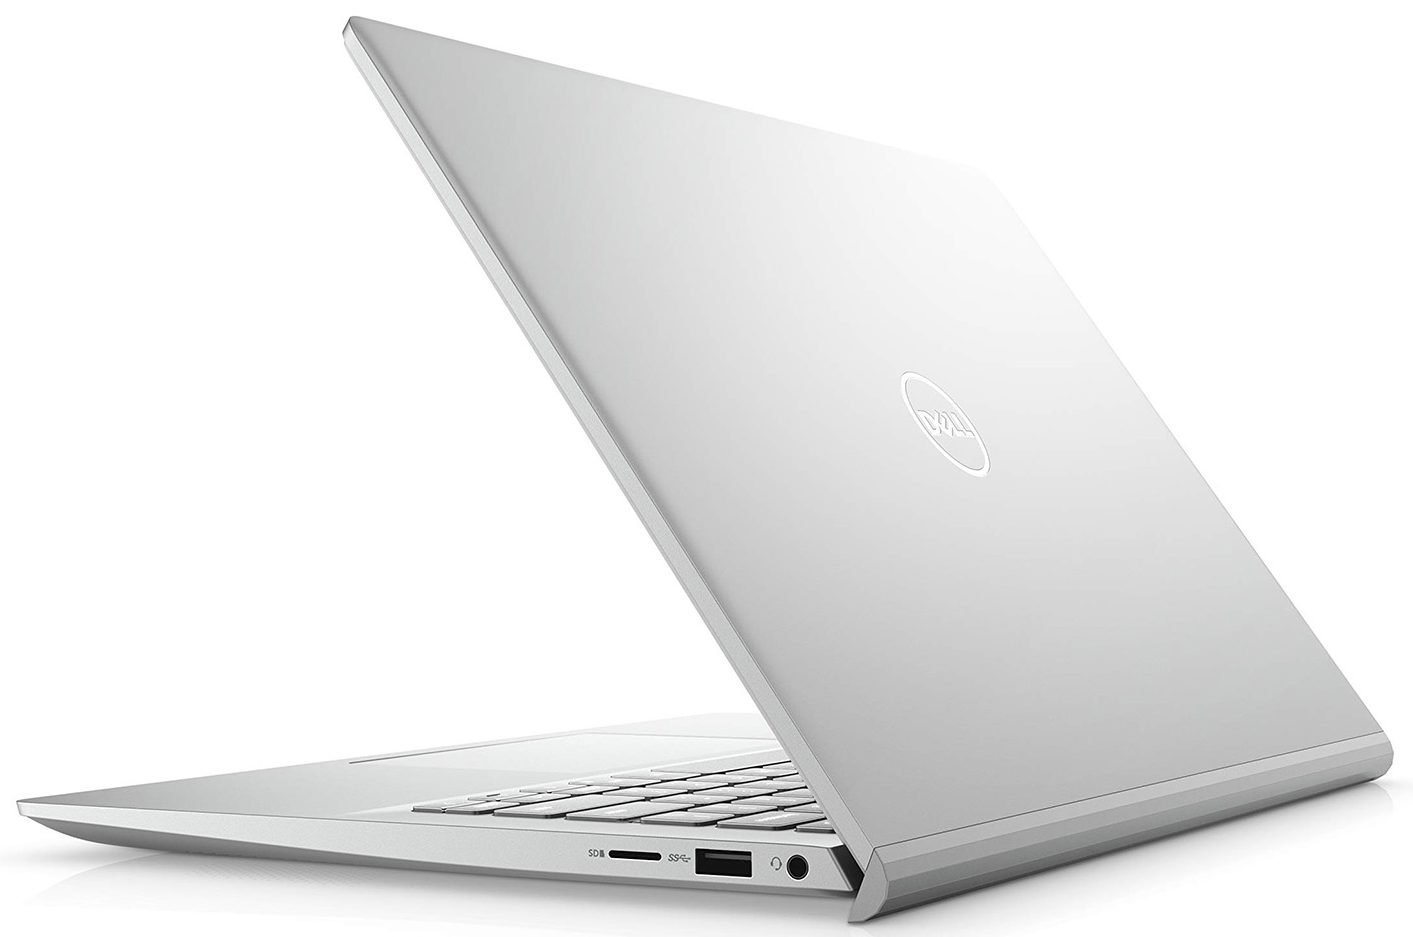 Dell Inspiron 14 5401 - Specs, Tests, and Prices